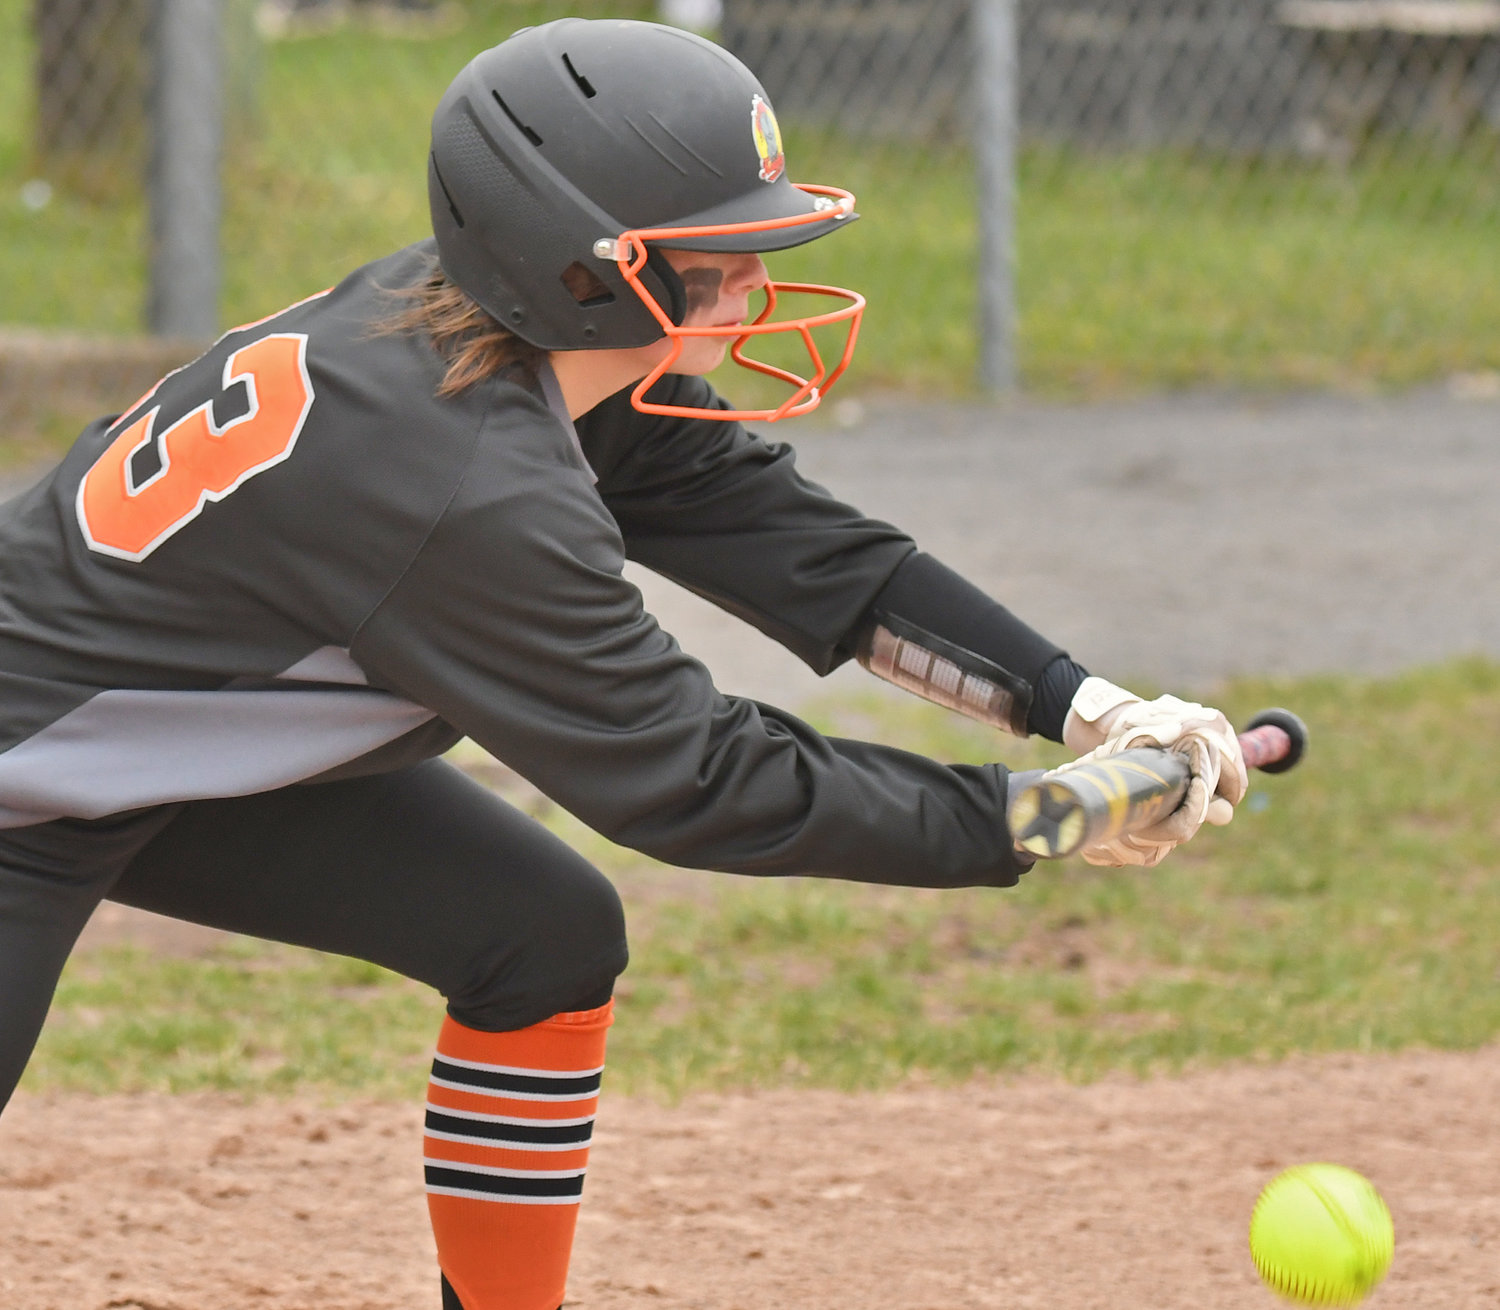 MOVING THE RUNNER — Rome Free Academy's Juliana Huckabone lays down a sacrifice bunt to advance the runner to third in the first inning of Monday's game at home against Fayetteville-Manlius. She drove in a run in the game but RFA lost 4-3.